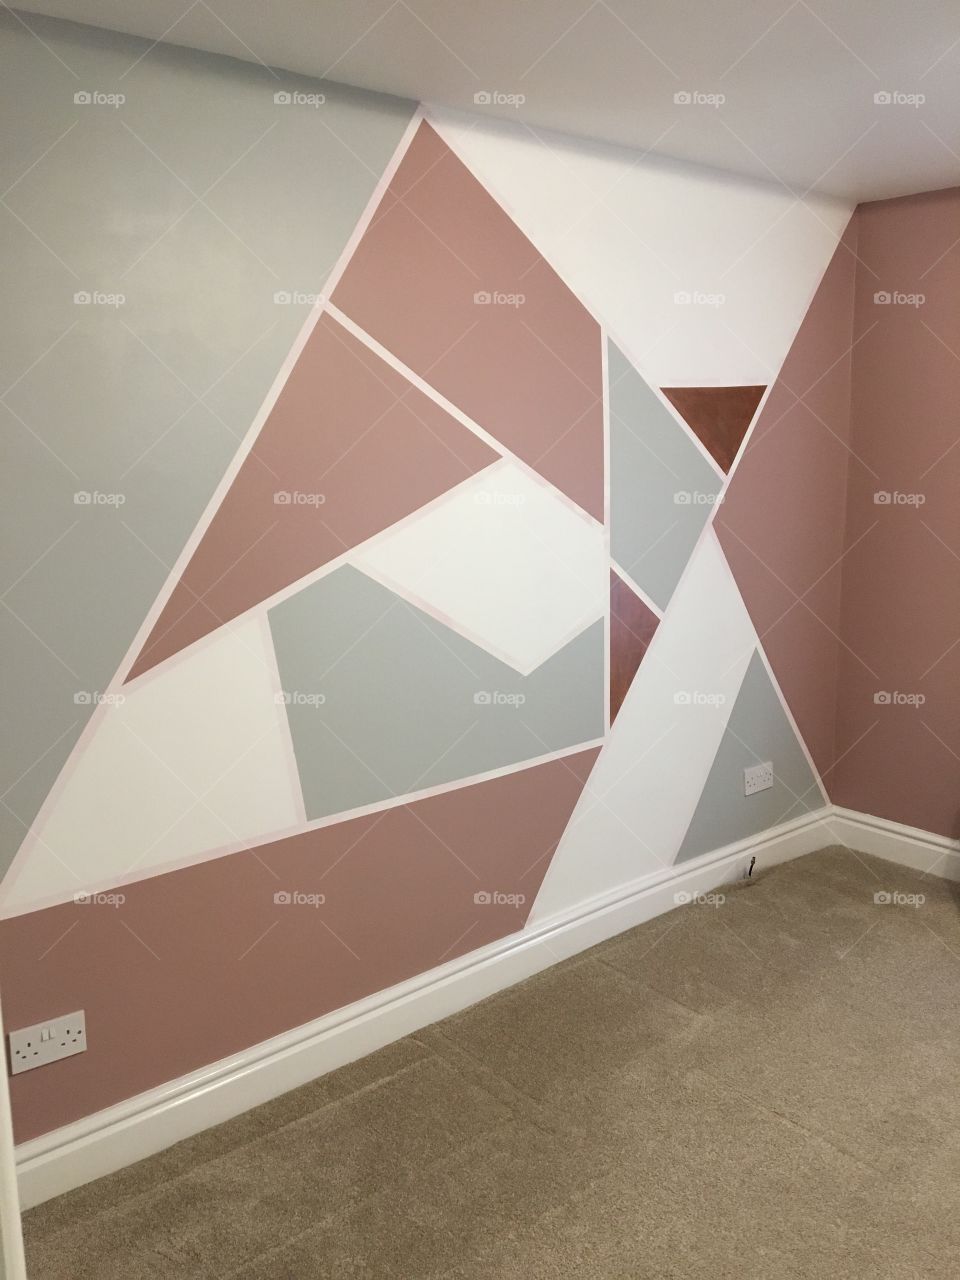 Decorating girls bedroom by painting geometric pattern straight on to the wall. Looks stunning!